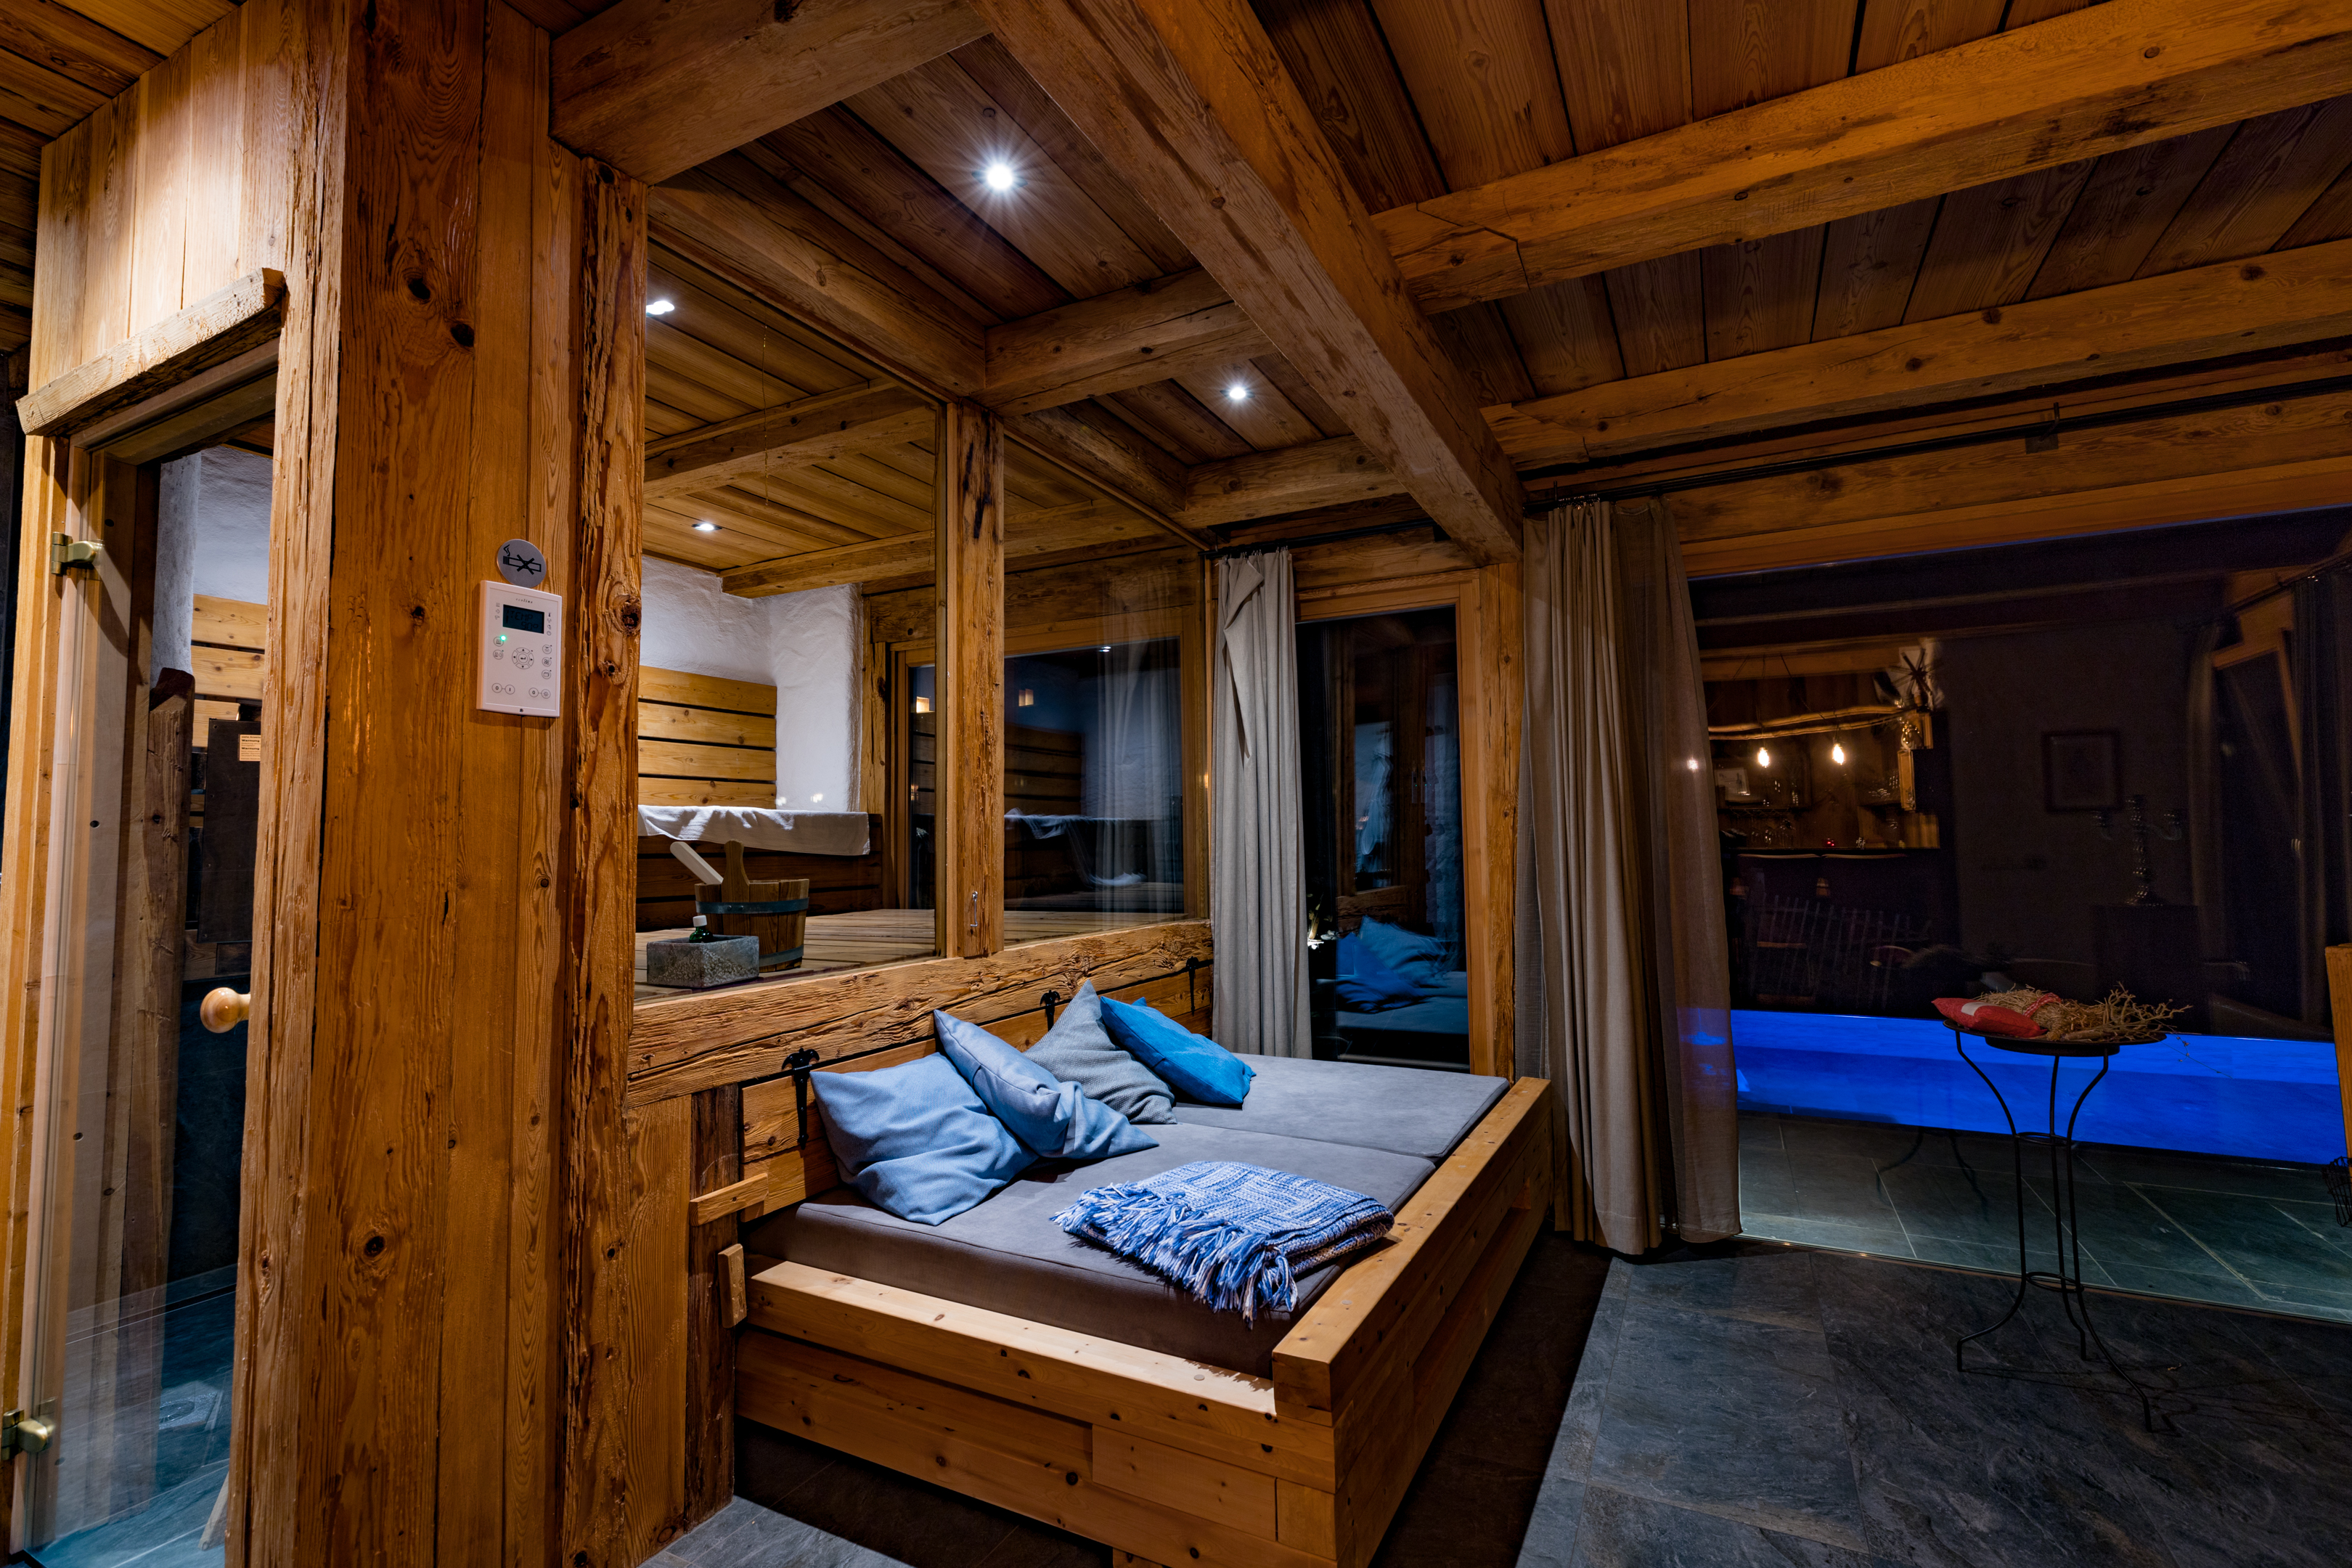 Luxury Chalet Sauna - exclusiv only for you - 1000m above sealevel